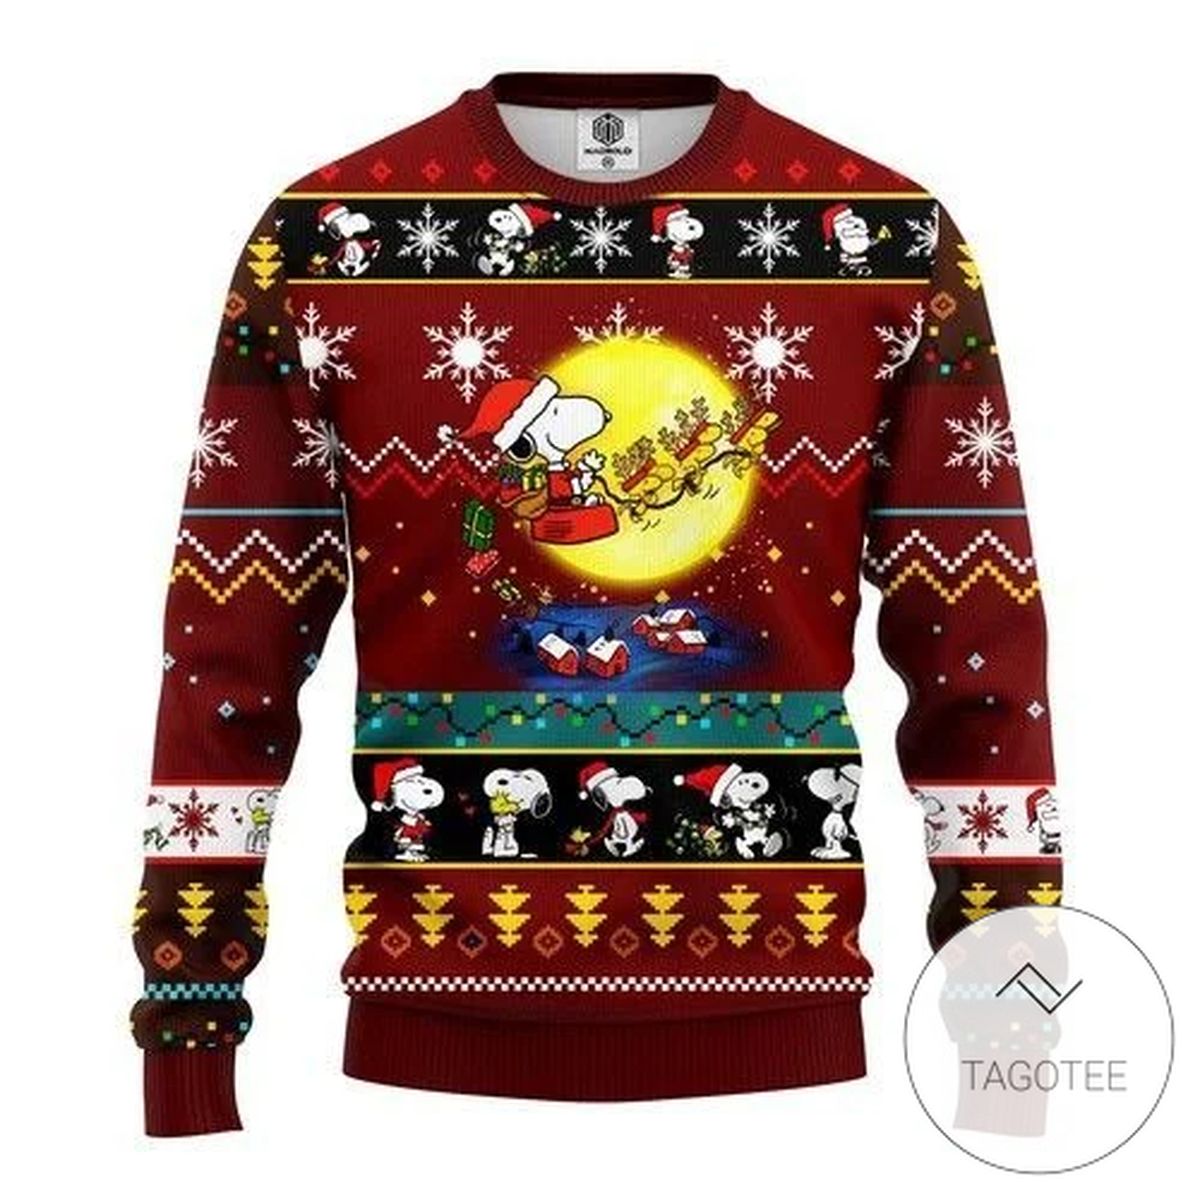 Snooby Sweatshirt Knitted Ugly Christmas Sweater